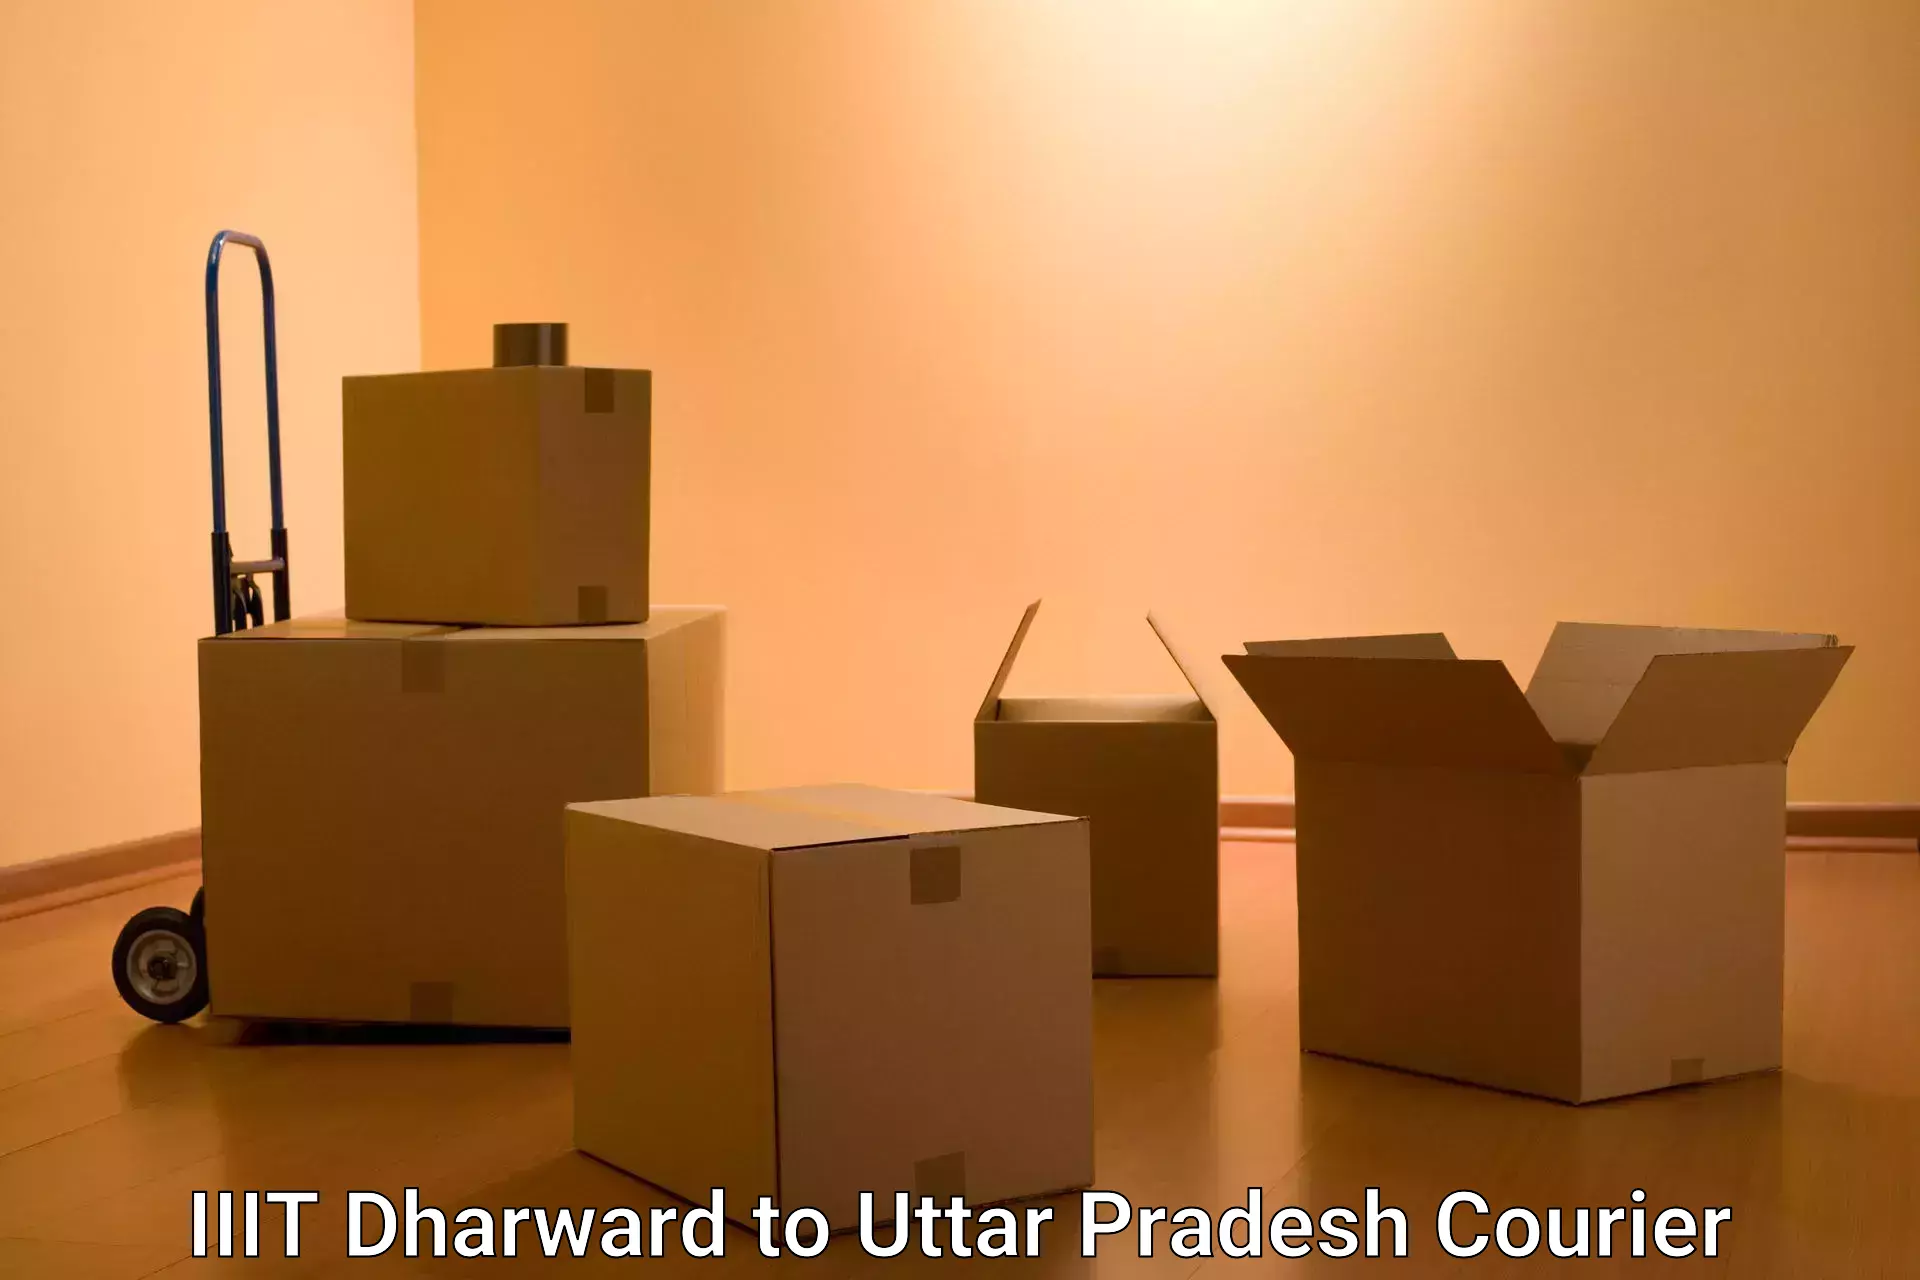 Overnight delivery services IIIT Dharward to Sitapur